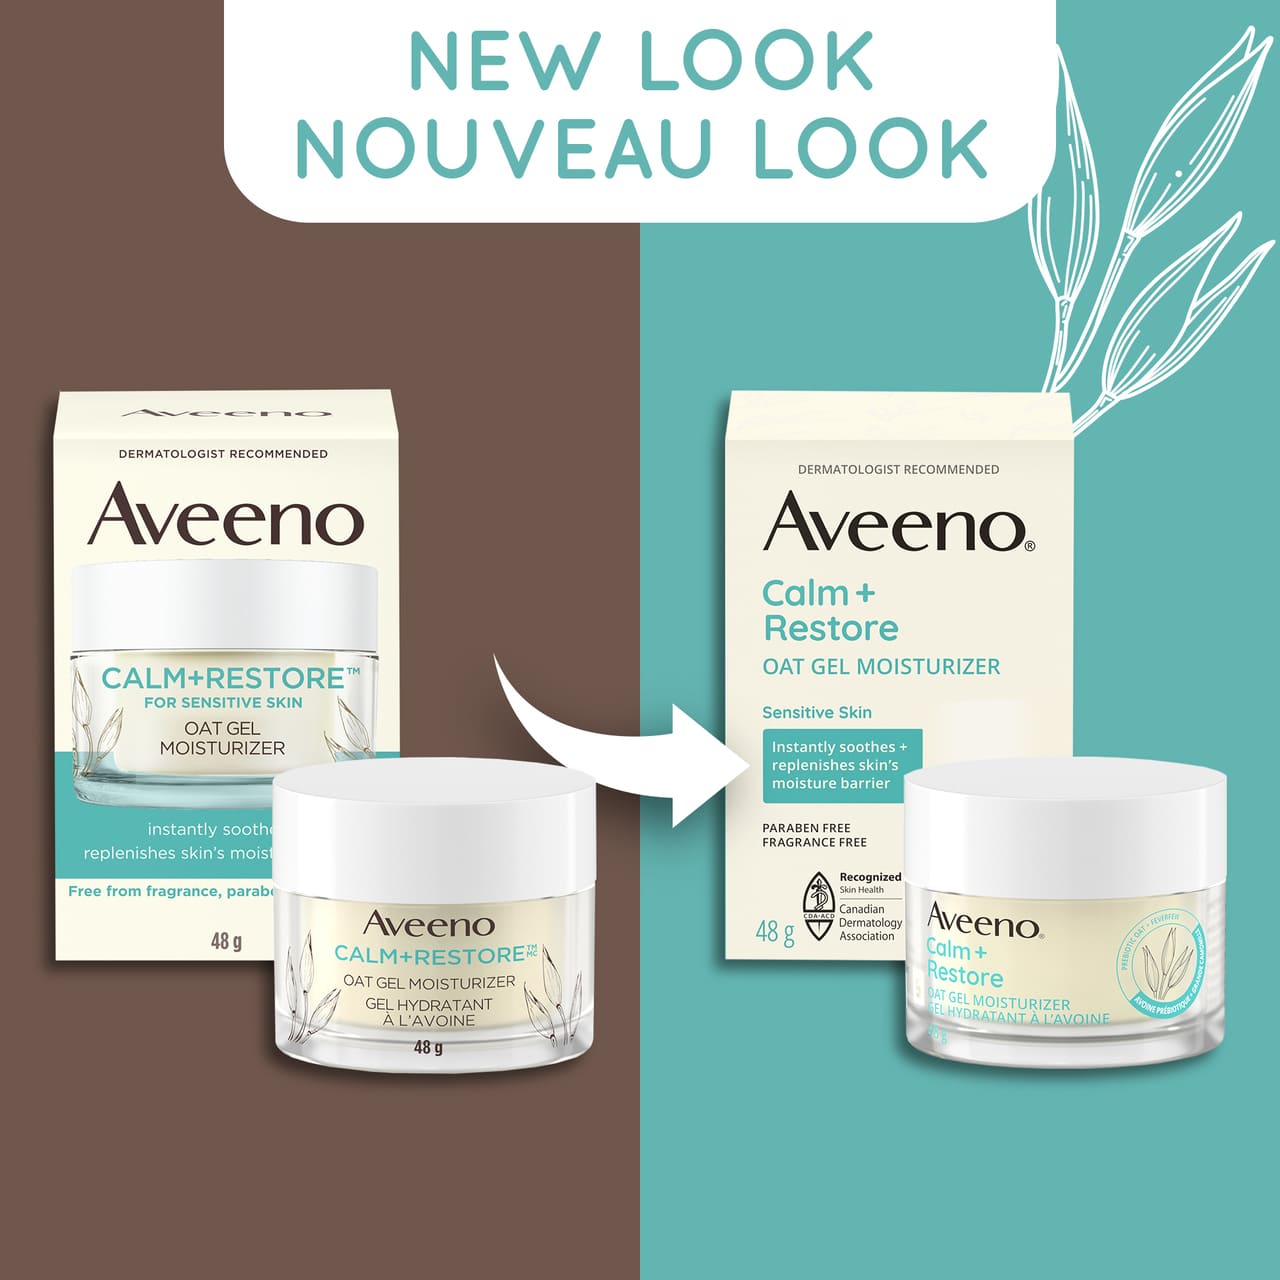 Old and new packaging of AVEENO® Calm + Restore Oat Gel Moisturizer, 48 g jar, with text 'new look'